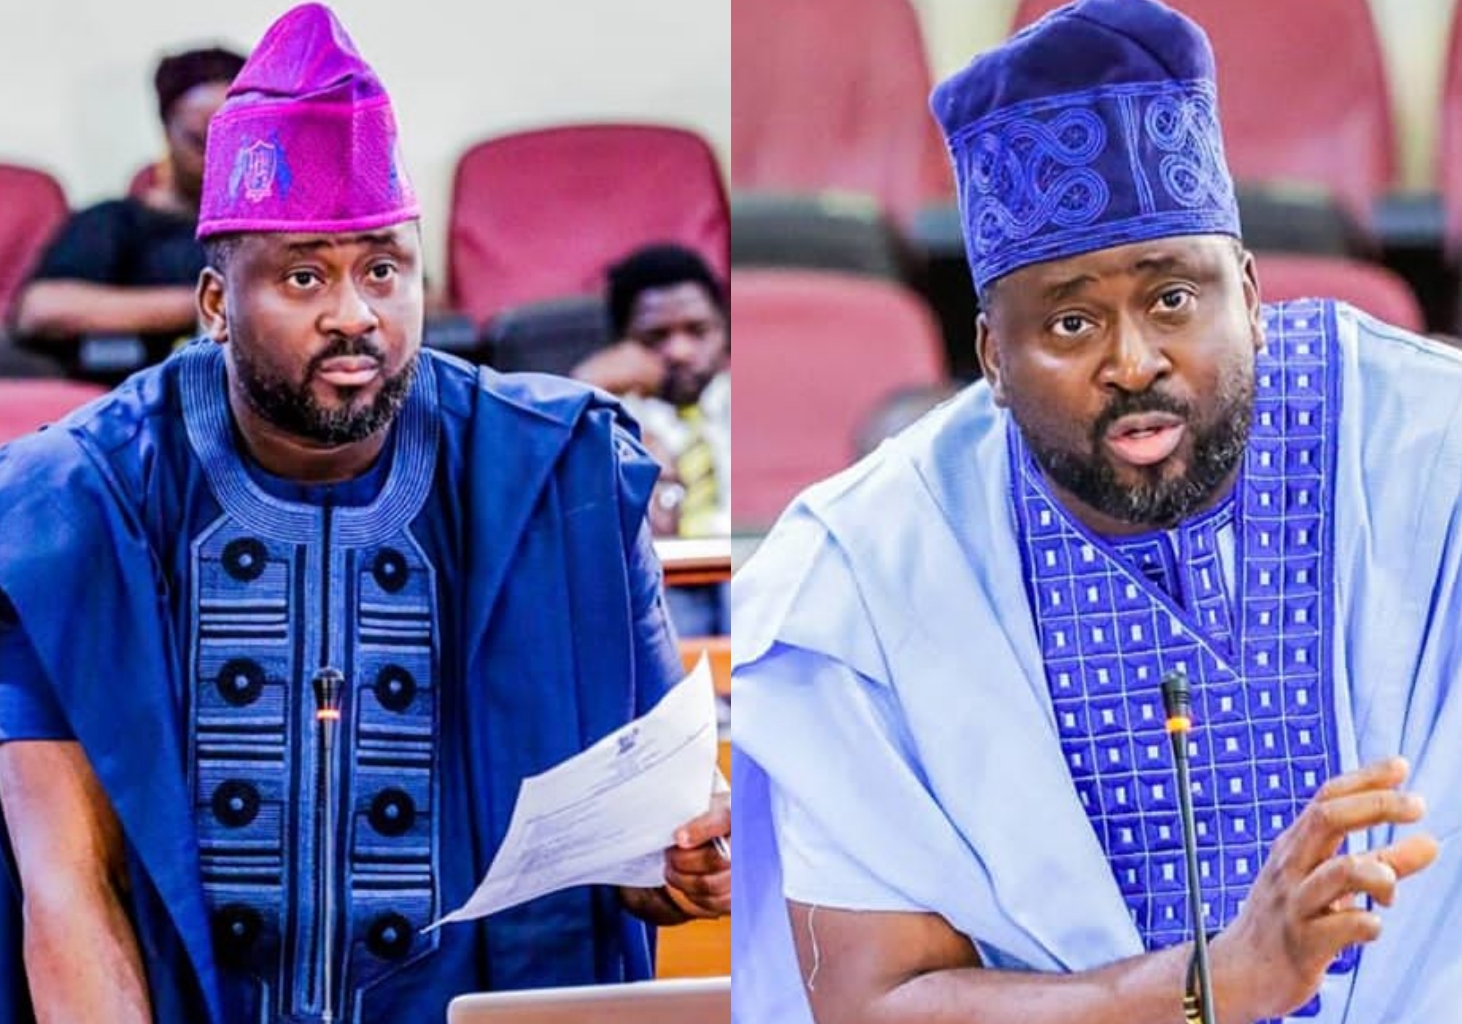 COVID-19 cases will increase if lockdown is lifted on May 4th – Desmond Elliot